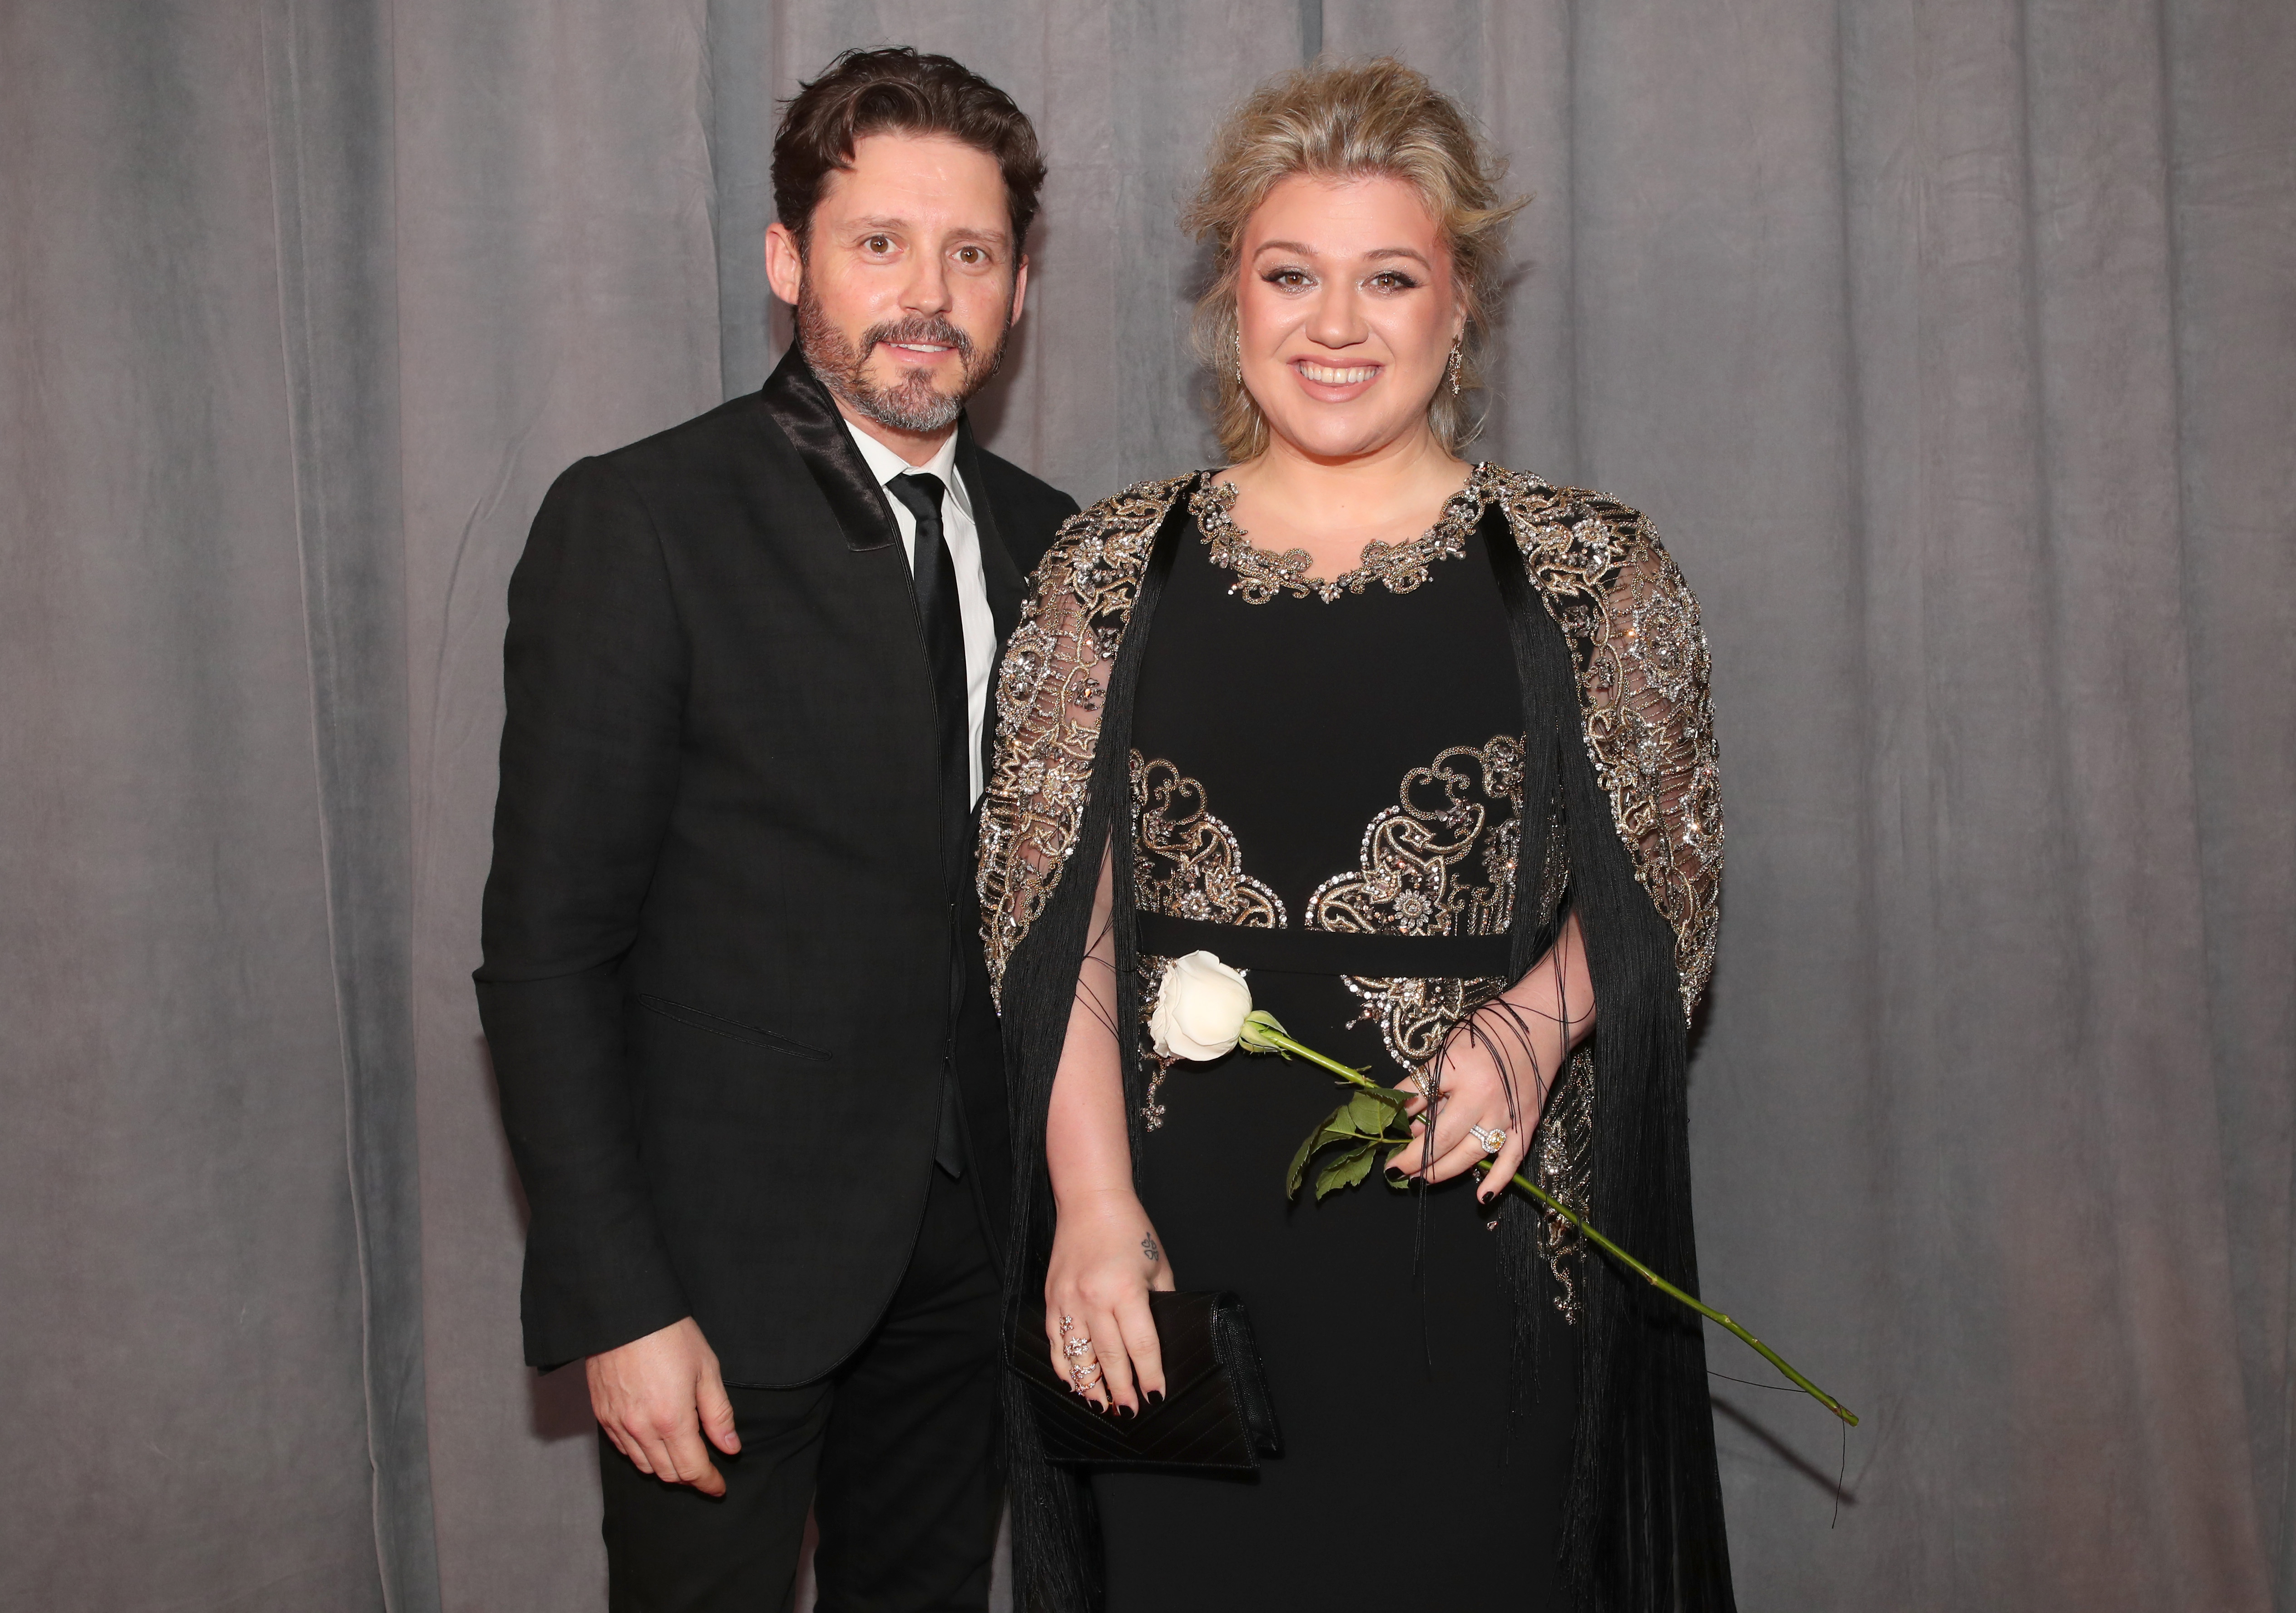 How Long Have Kelly Clarkson & Her Husband Been Married?